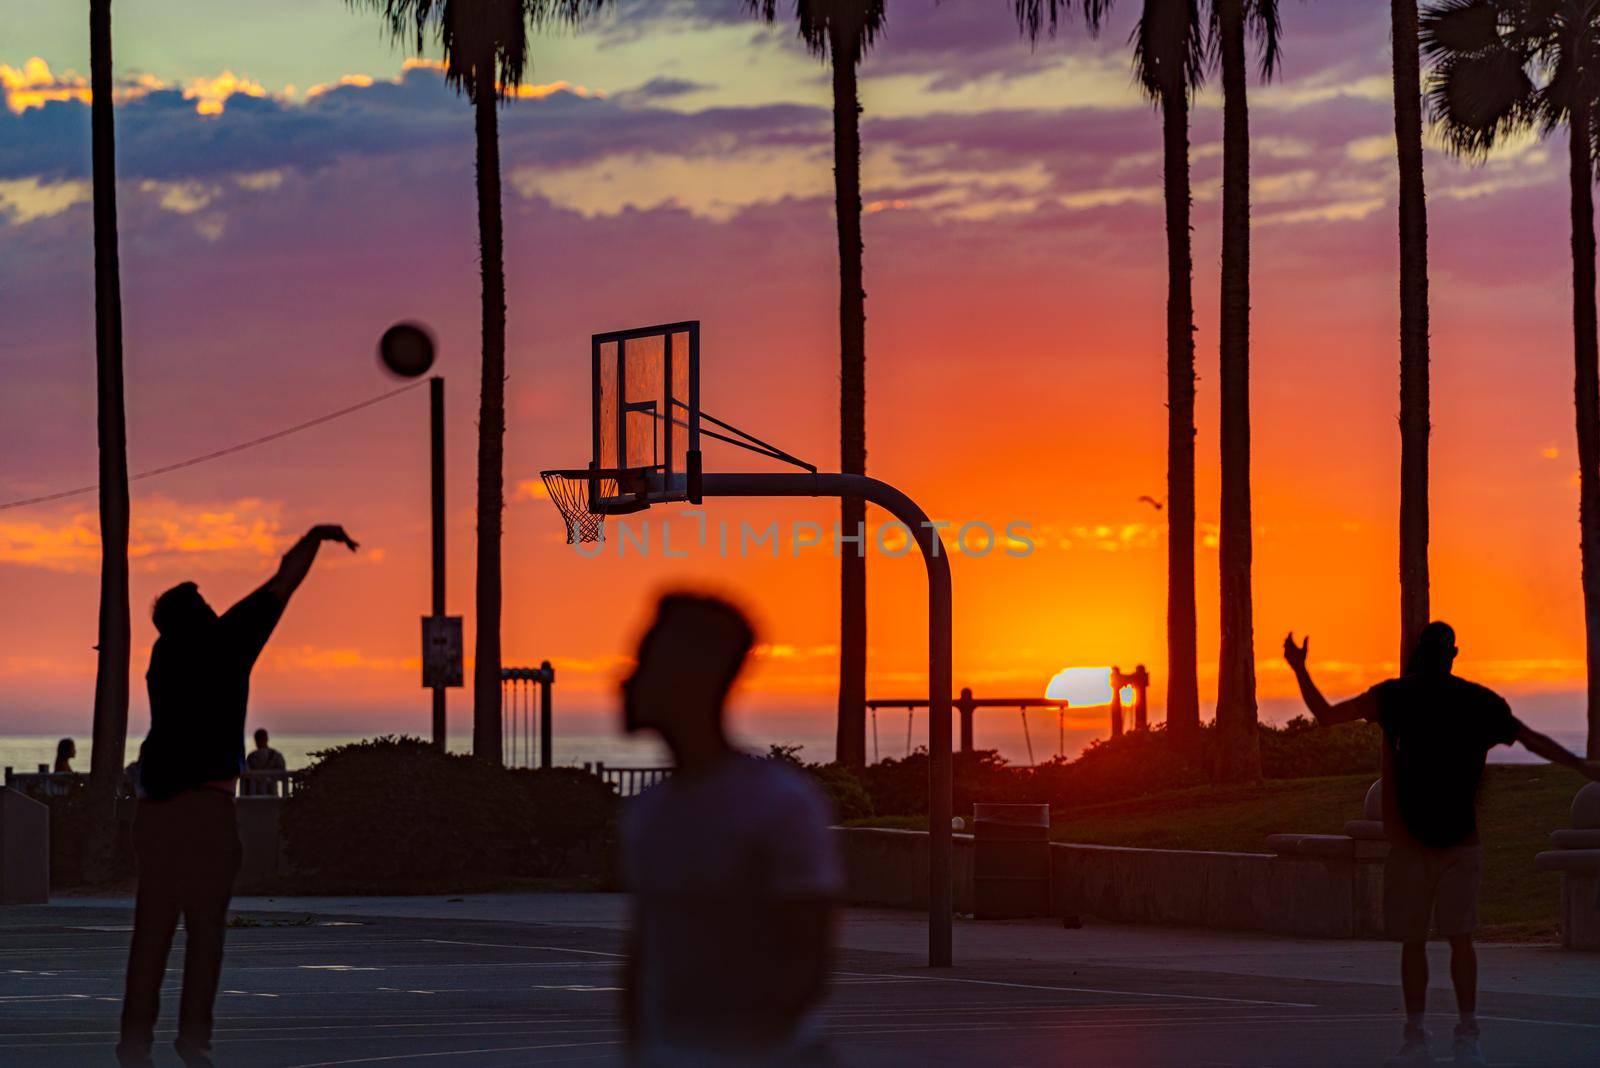 People playing basketball at sunset beach in Santa Monica, California, United States of America. Sun and clouds and palms in background.